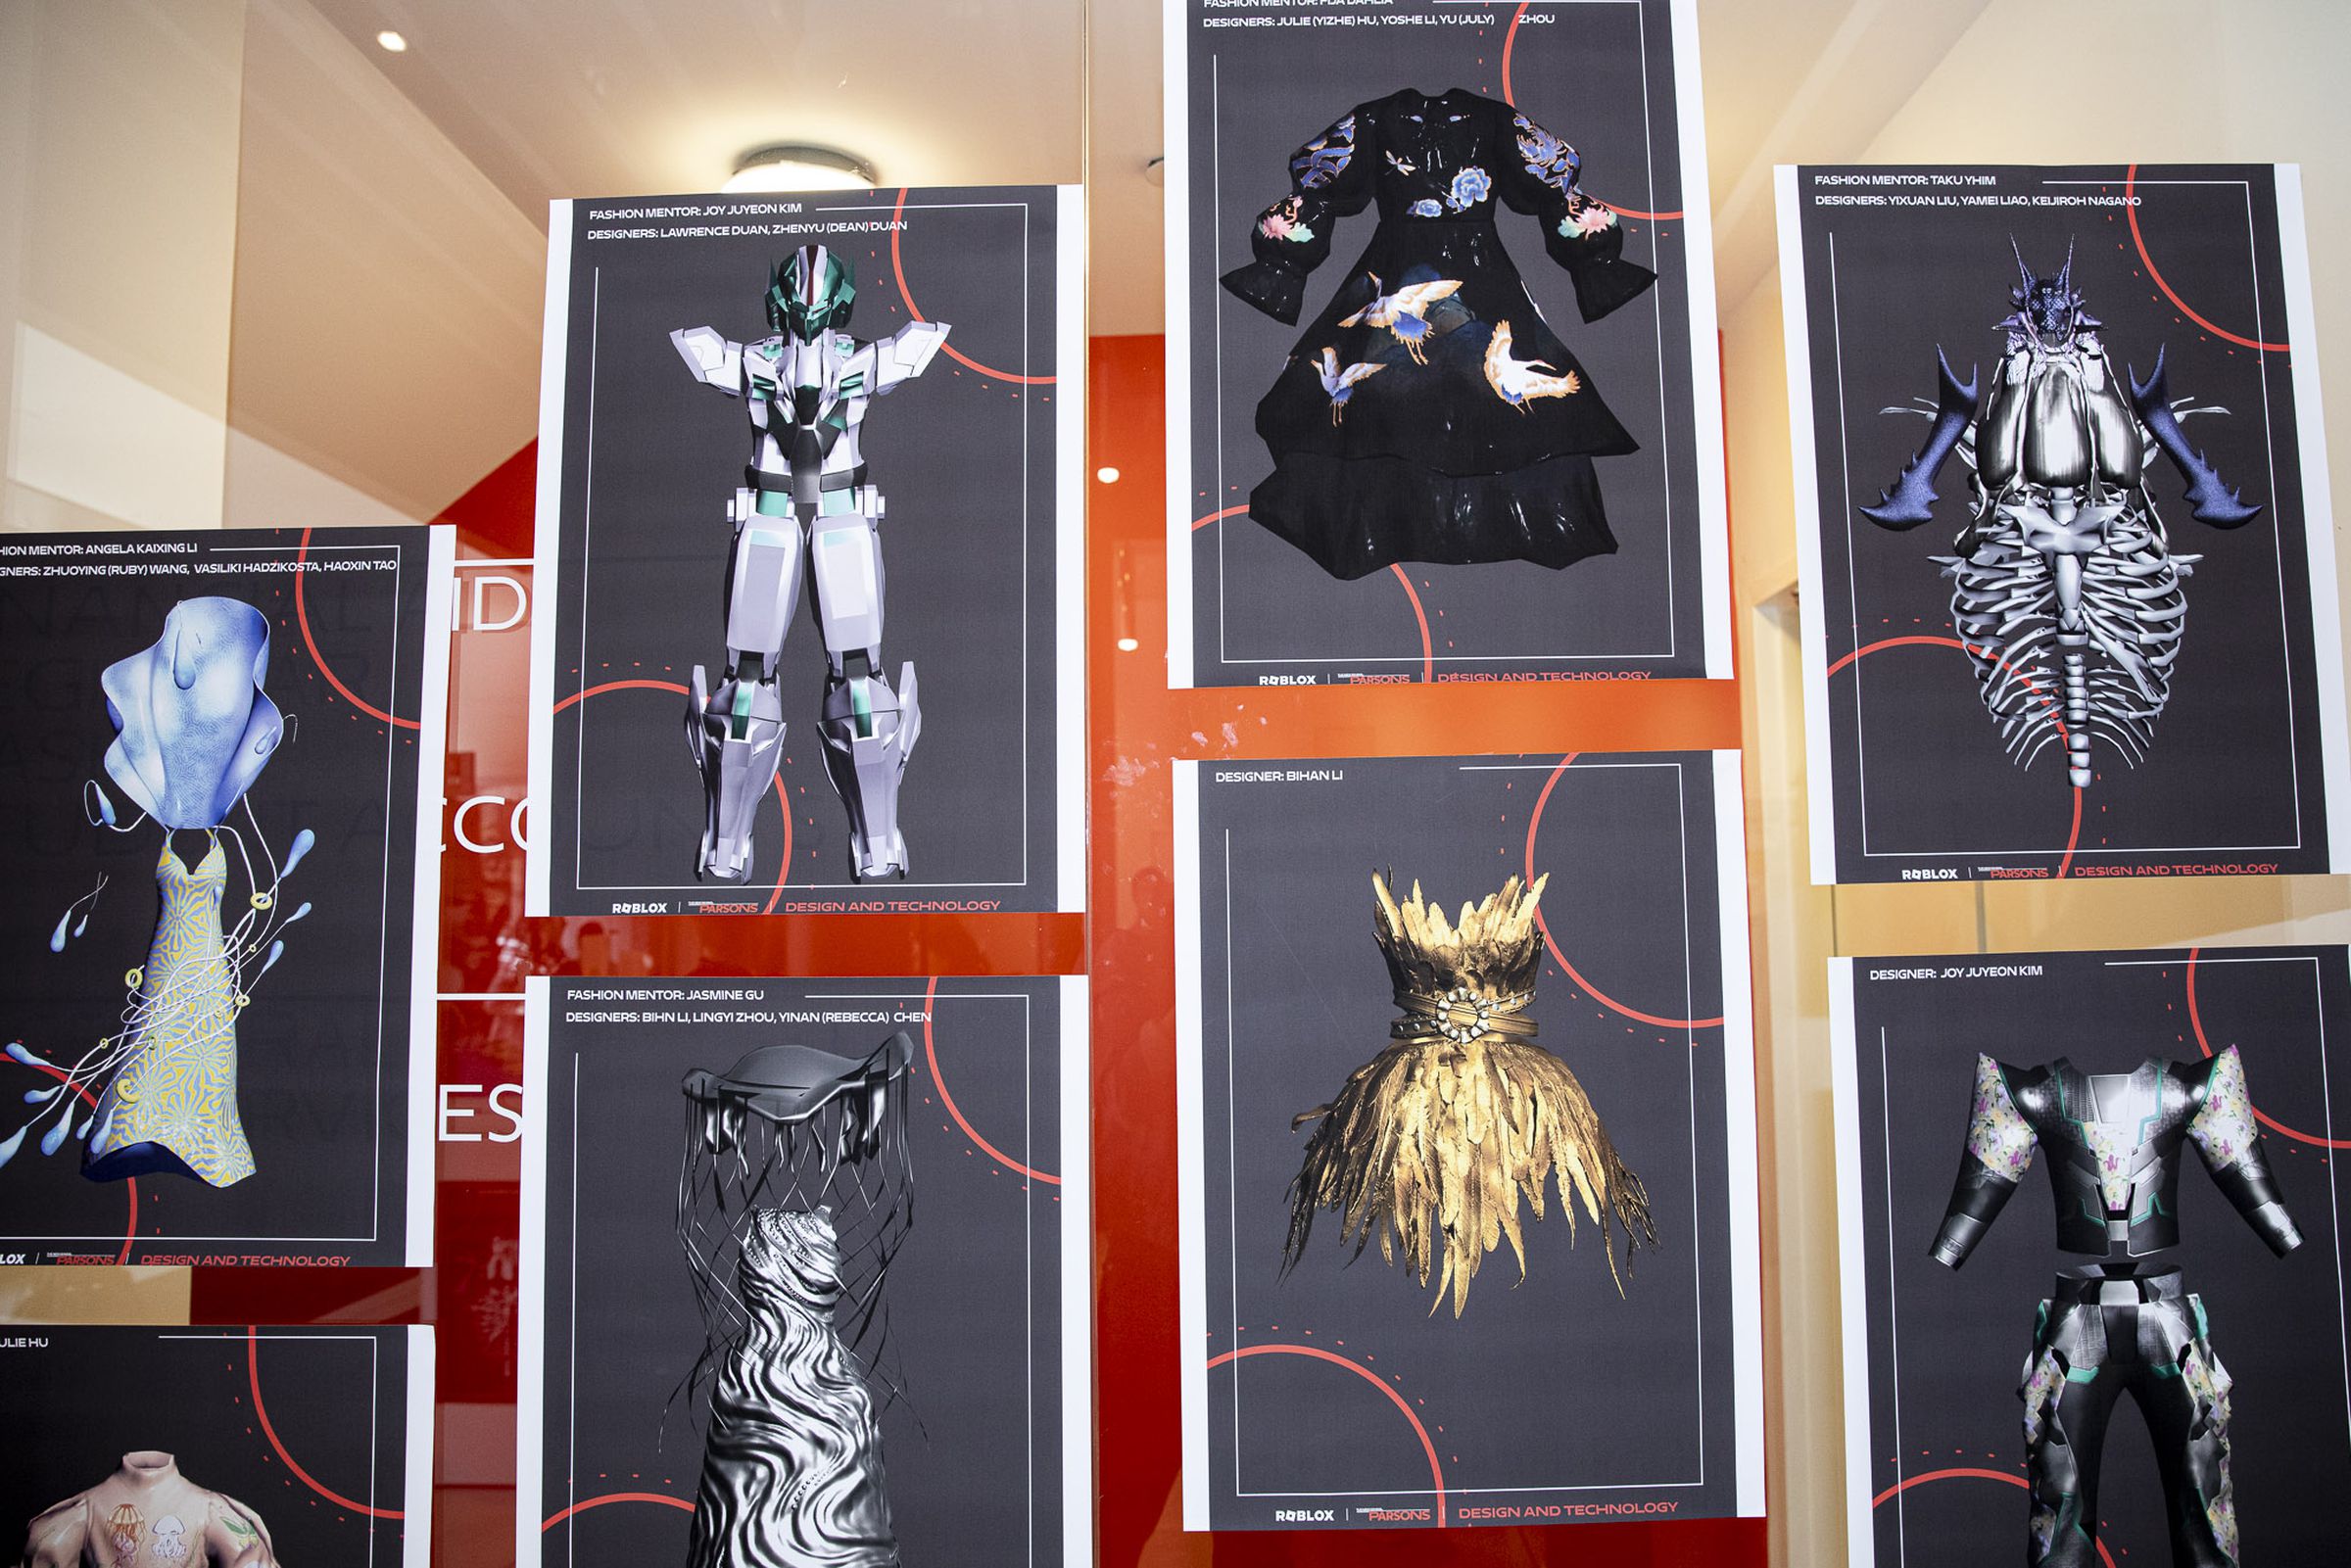 A collection of digital garments printed on to physical paper and hung on a wall.